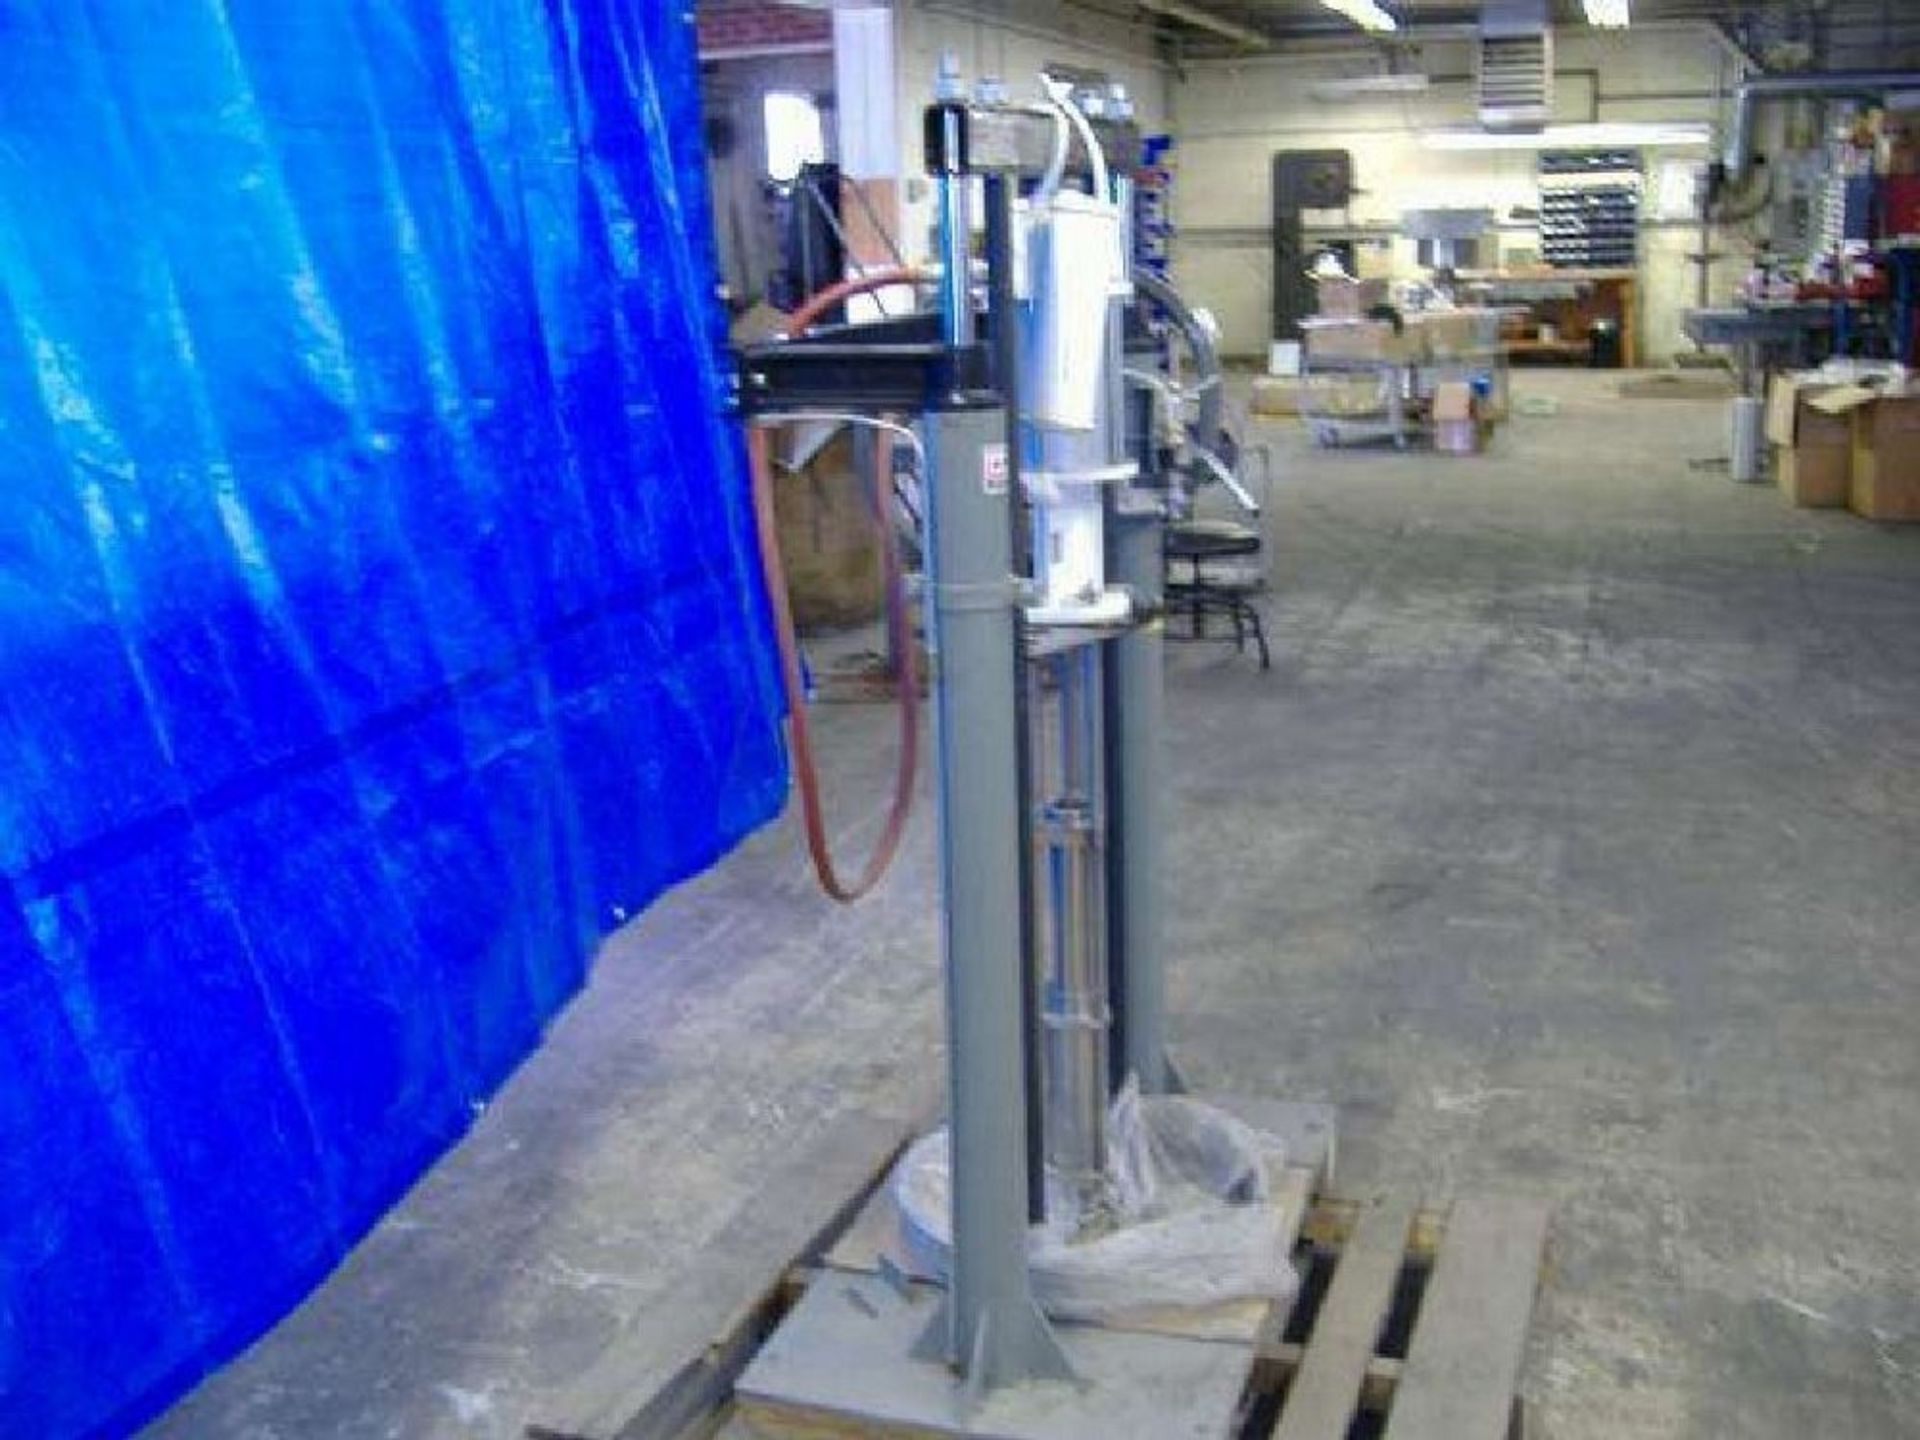 Qty (1) Pneumatic Drum Unloader - Sanitary - Pneumatic driven drum pump. - 22' diameter plunger with - Image 2 of 7